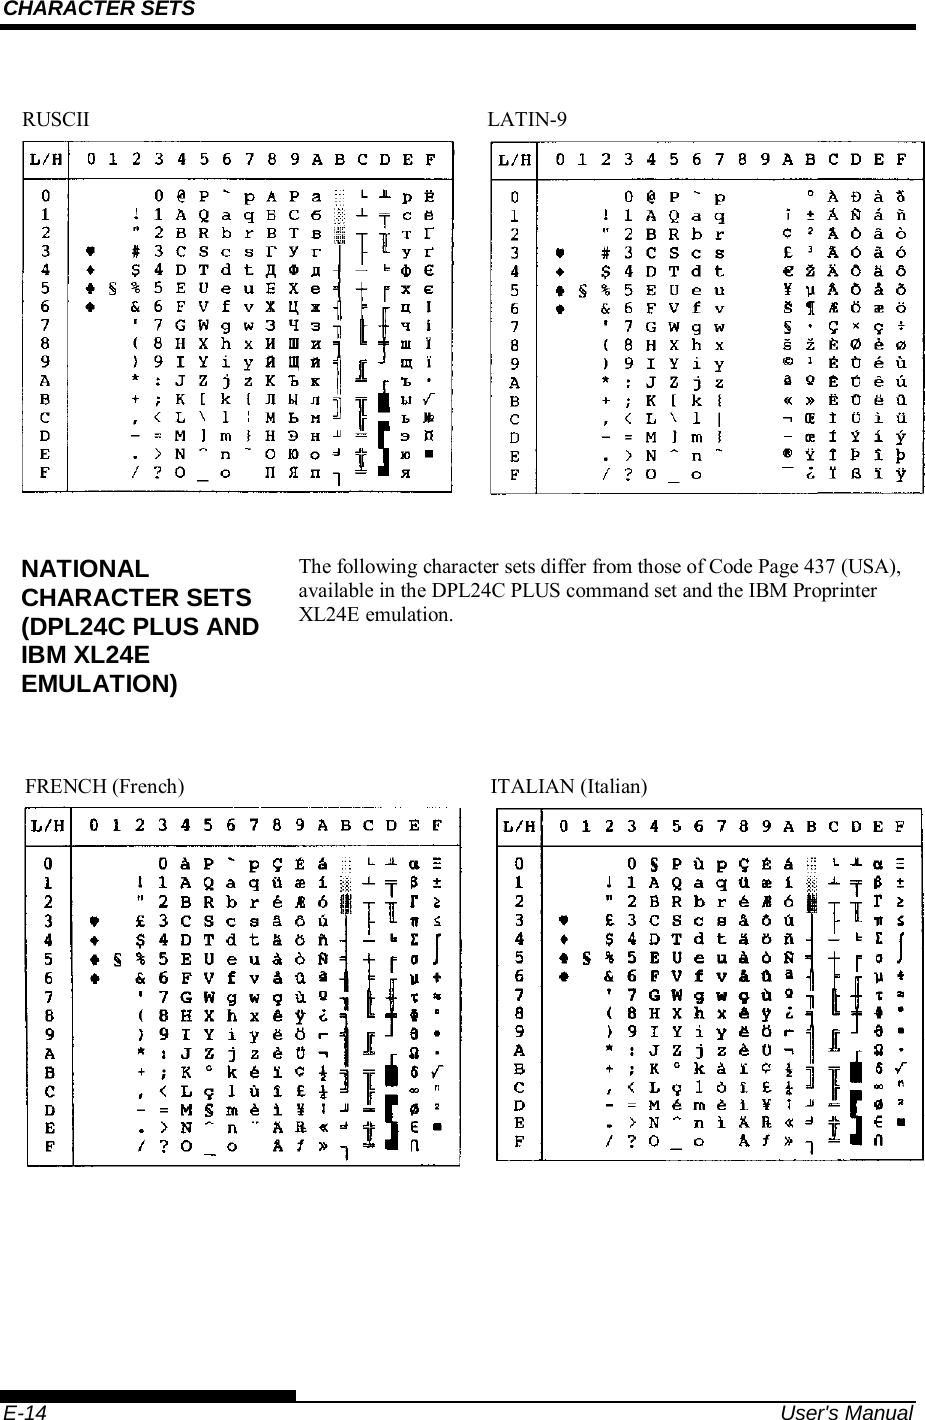 CHARACTER SETS    E-14  User&apos;s Manual            The following character sets differ from those of Code Page 437 (USA), available in the DPL24C PLUS command set and the IBM Proprinter XL24E emulation.                 NATIONAL CHARACTER SETS (DPL24C PLUS AND IBM XL24E EMULATION) RUSCII LATIN-9  FRENCH (French)  ITALIAN (Italian) 